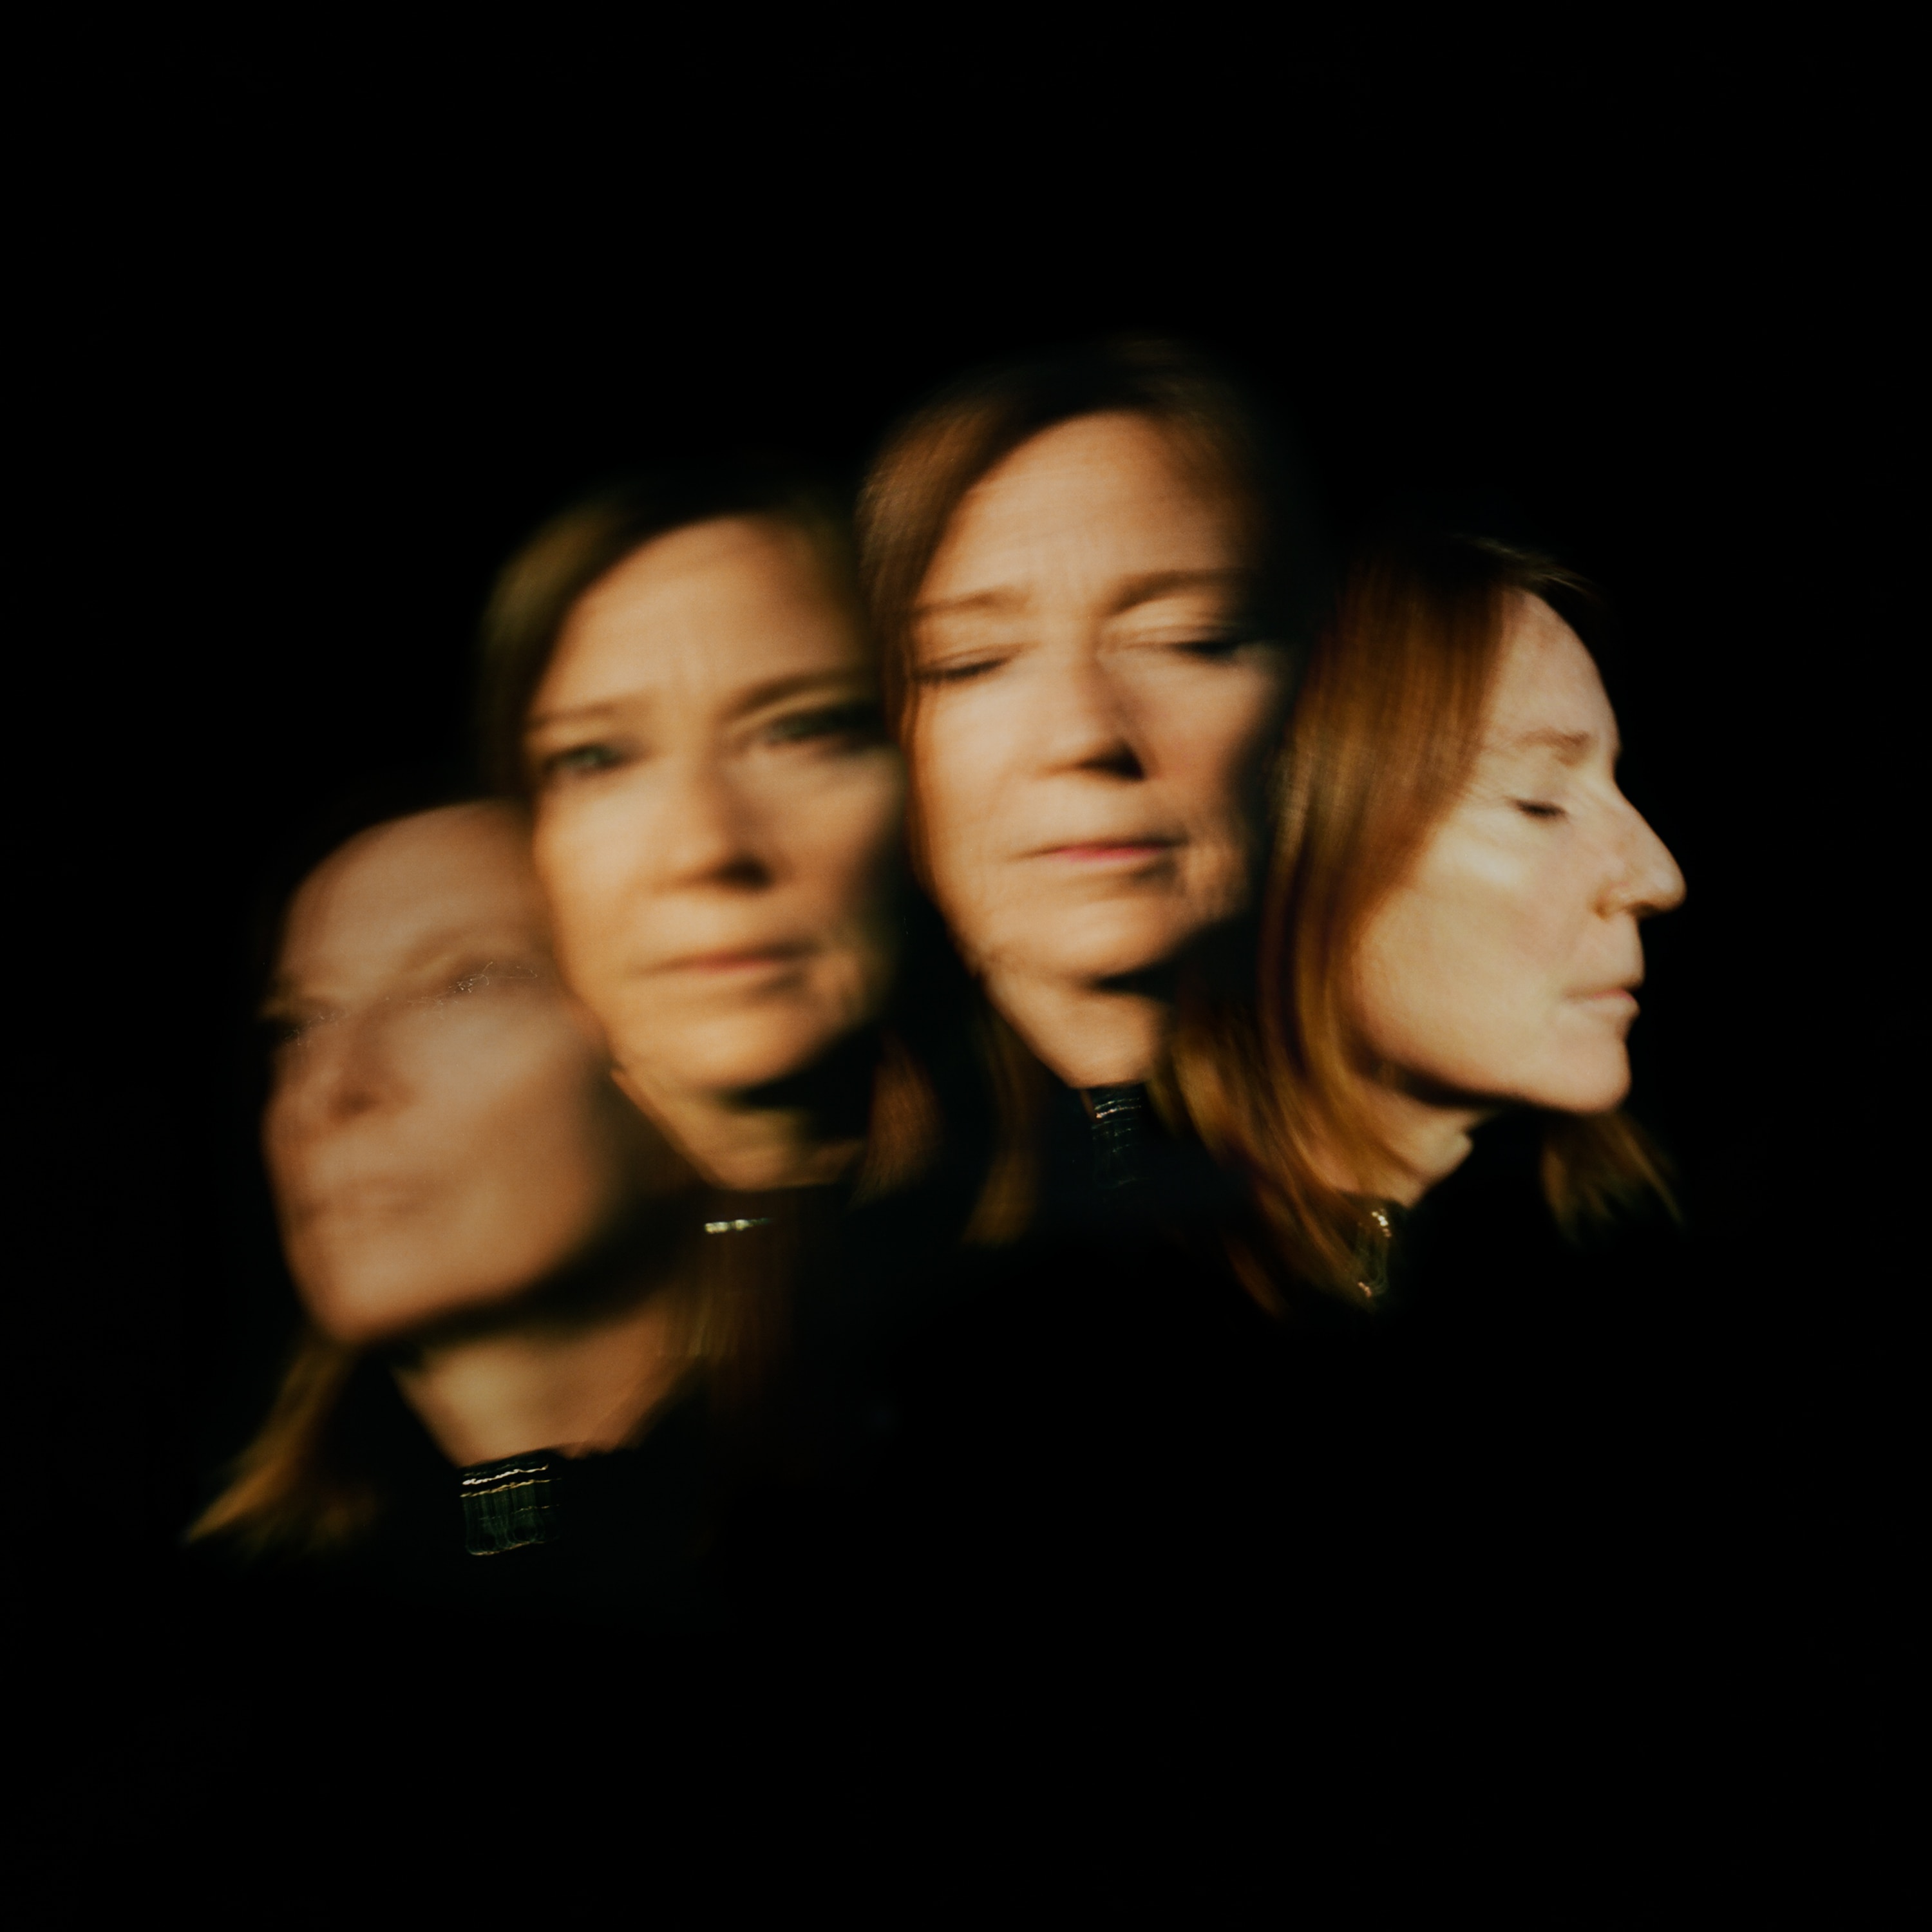 four blurry portrait images of red-headed woman against black background.